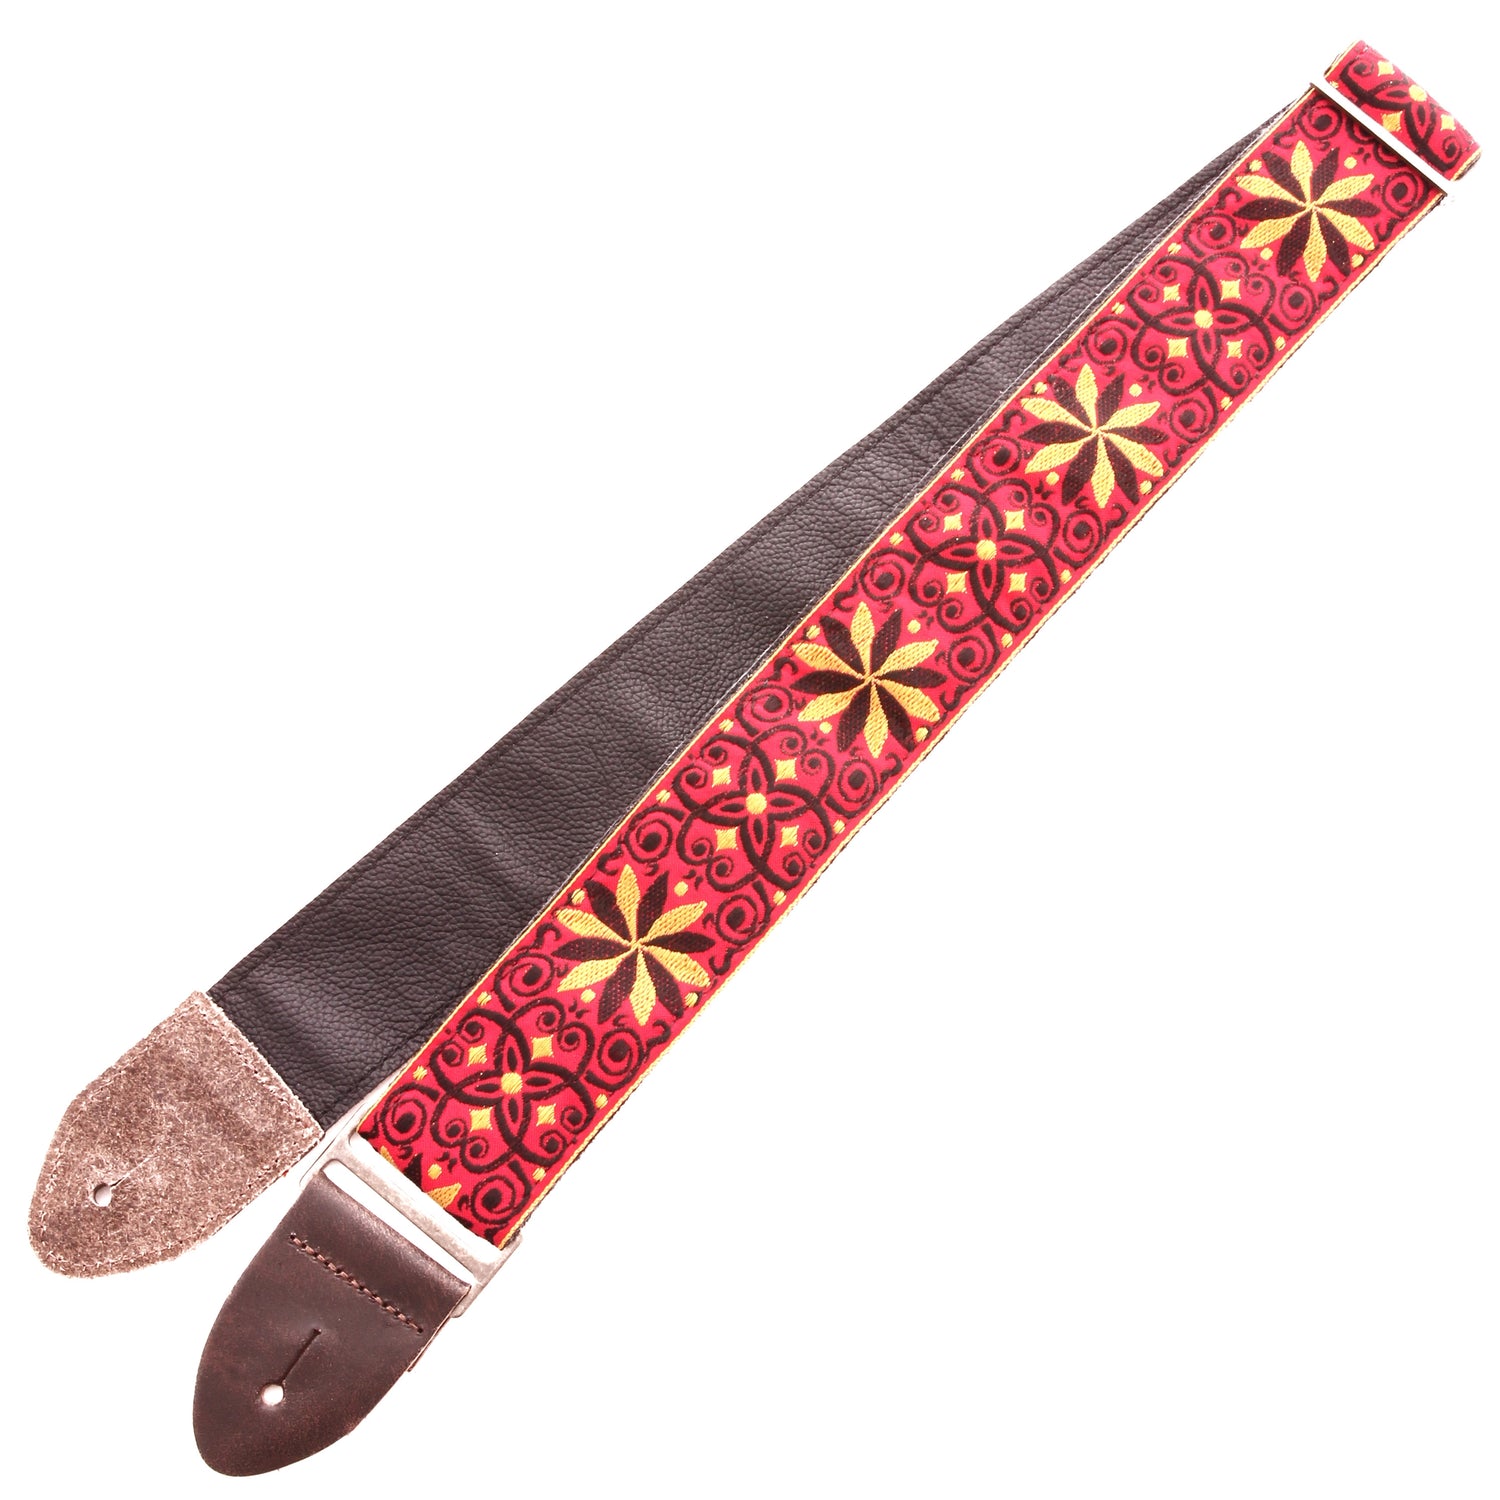 Image 2 of Levy 2" Jacquard Weave Guitar Strap with Hootenanny Design - SKU# M8HTV-21 : Product Type Accessories & Parts : Elderly Instruments